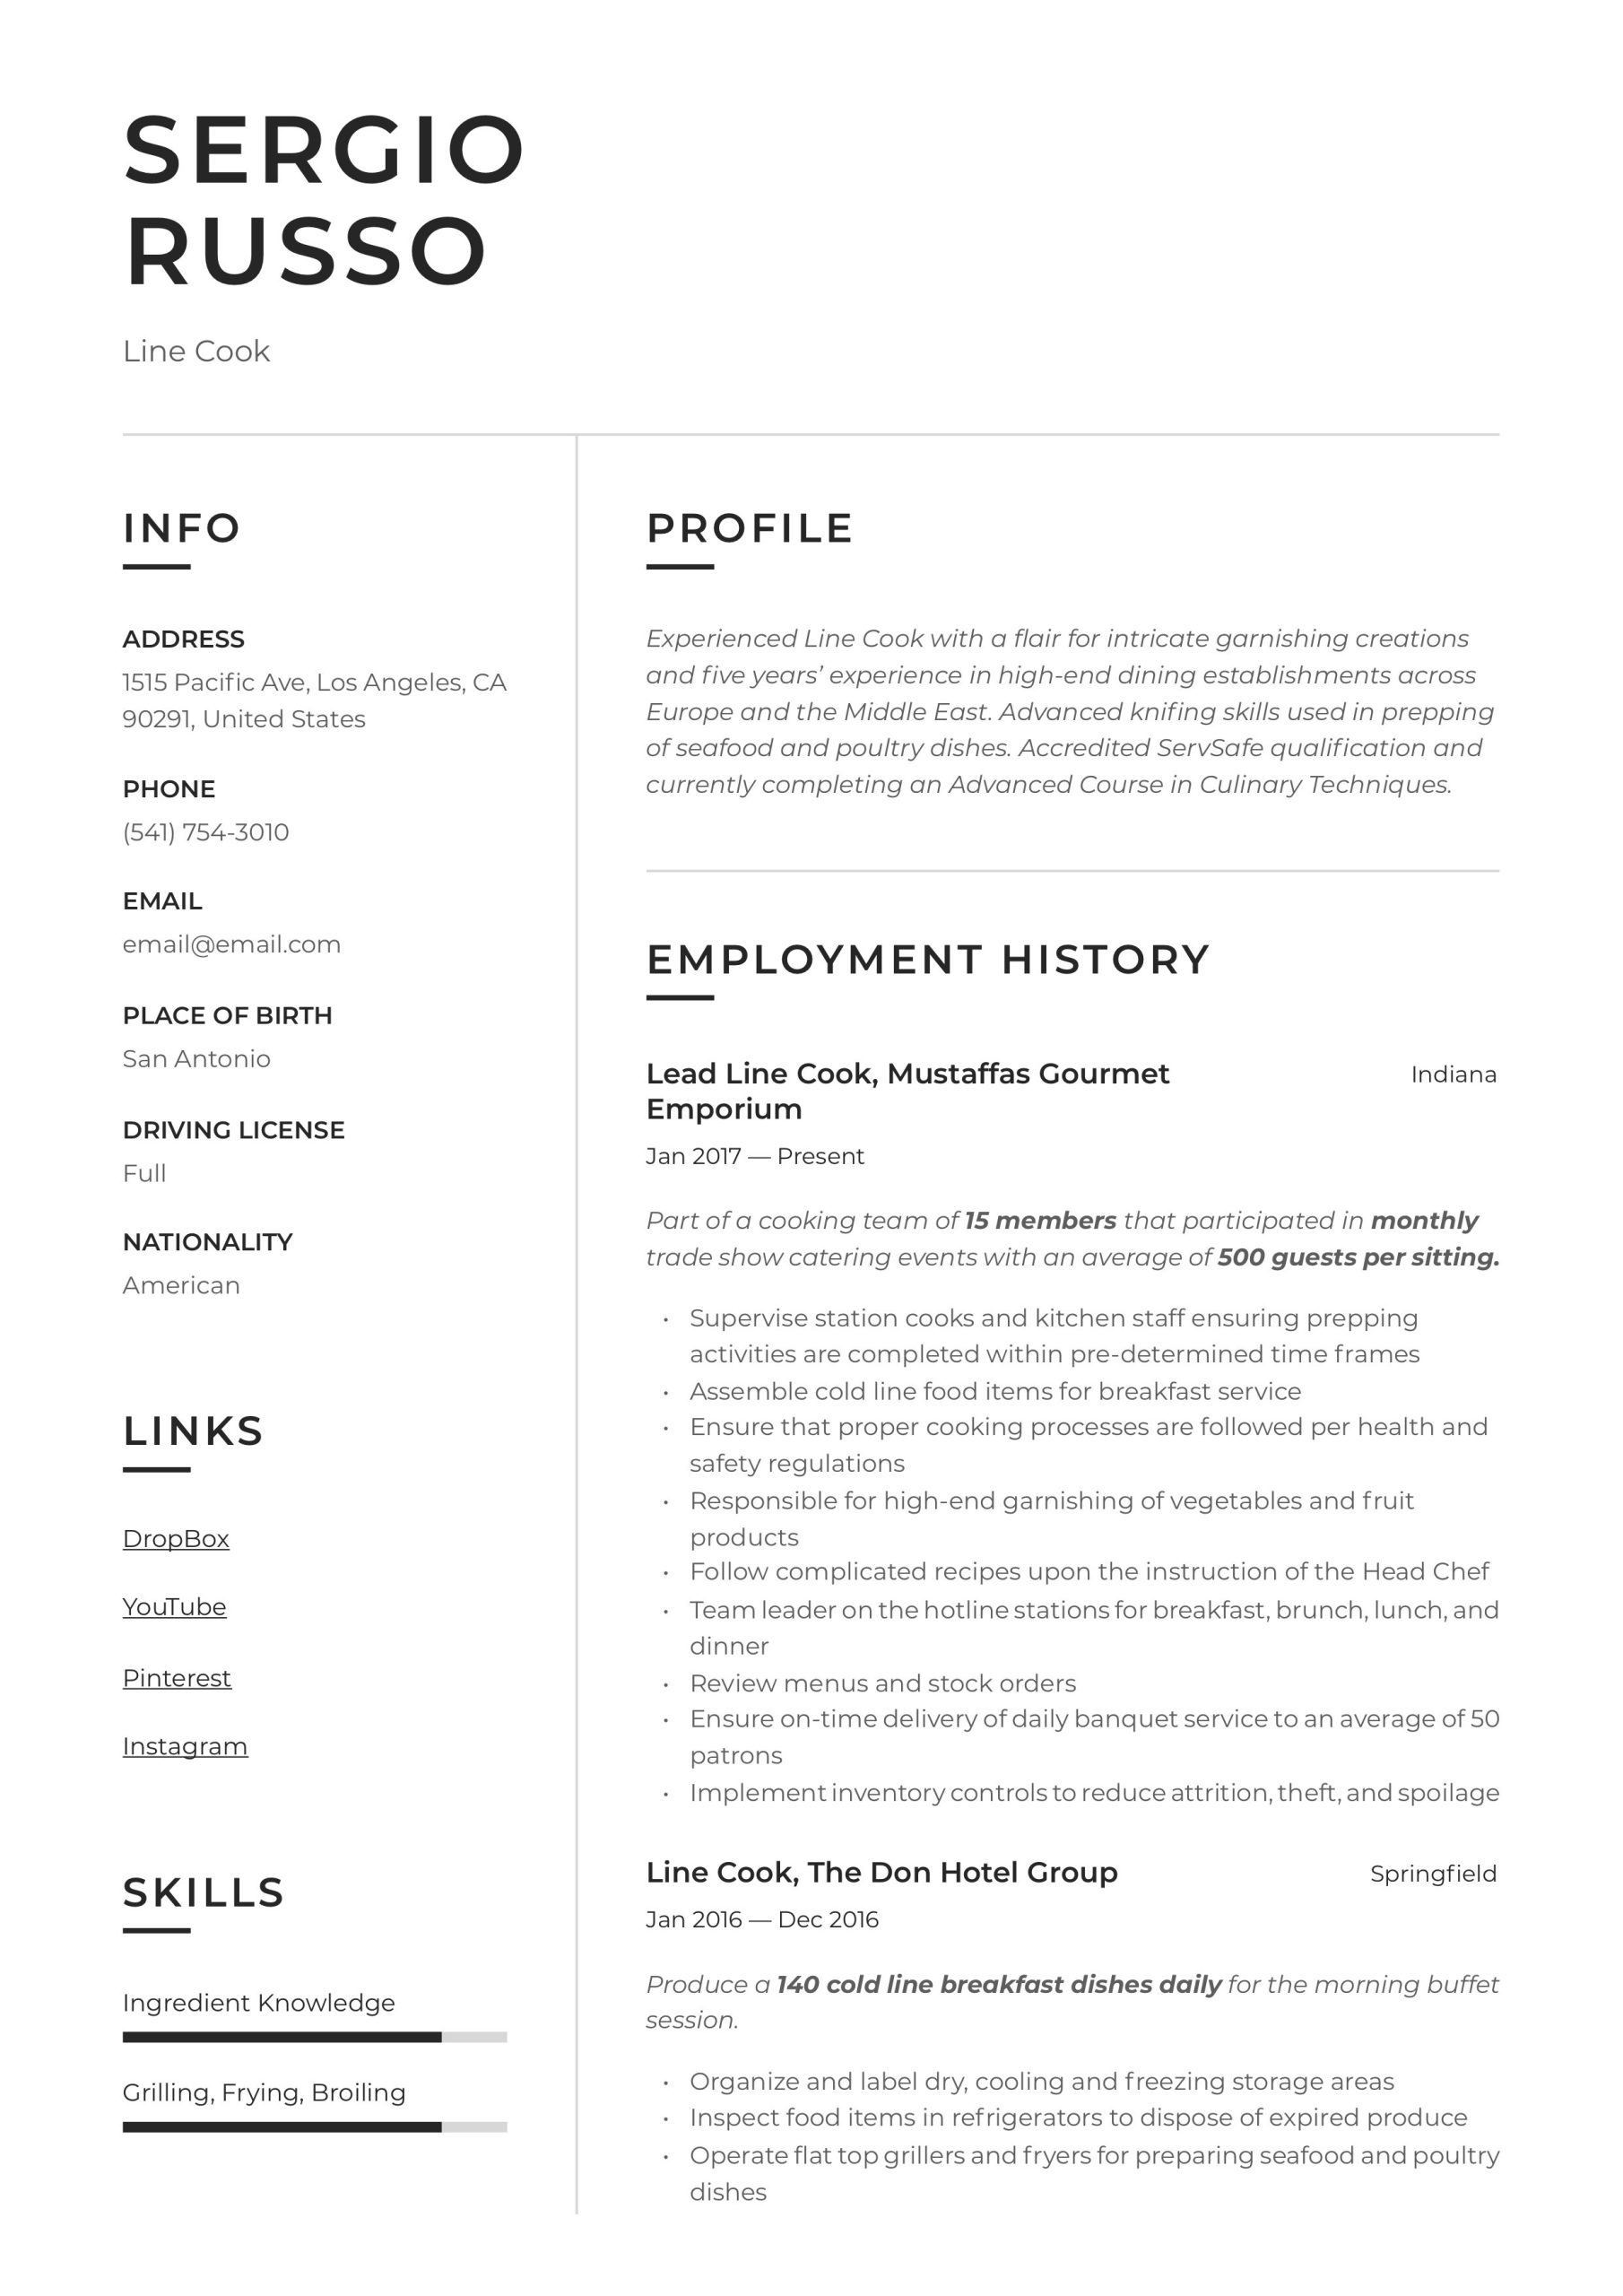 Home Cooking Experience On Resume Sample Line Cook Resume & Writing Guide  12 Resume Examples 2020